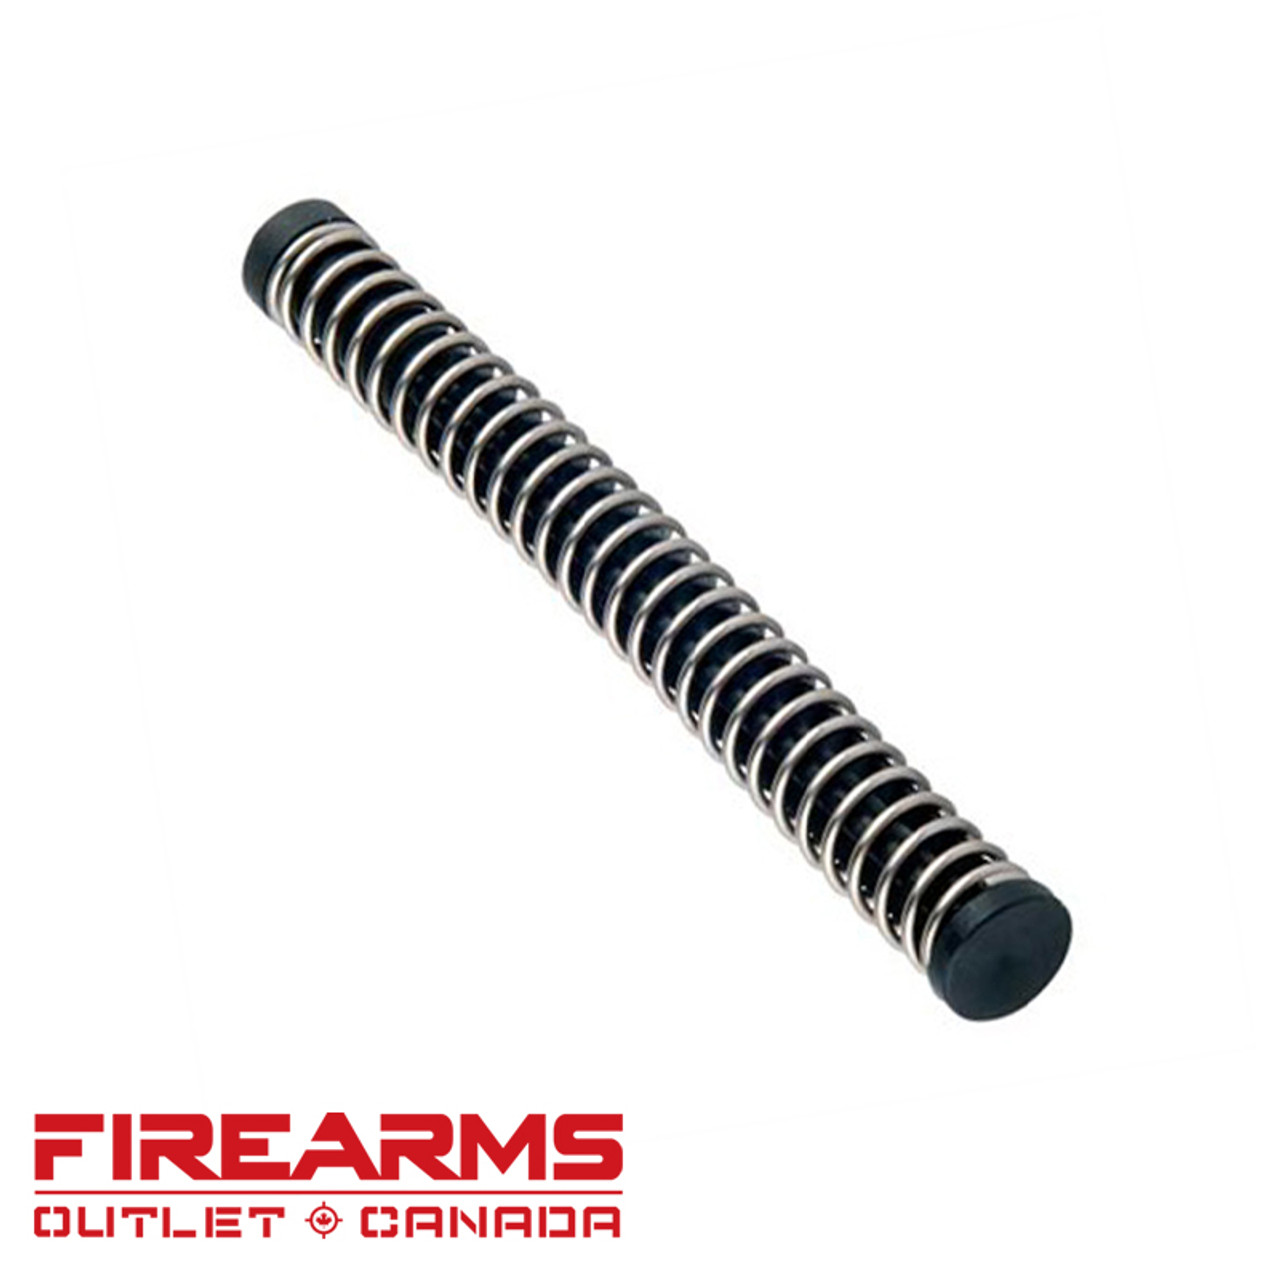 Beretta 90-Two Recoil Spring & Guide Assembly [C88138]